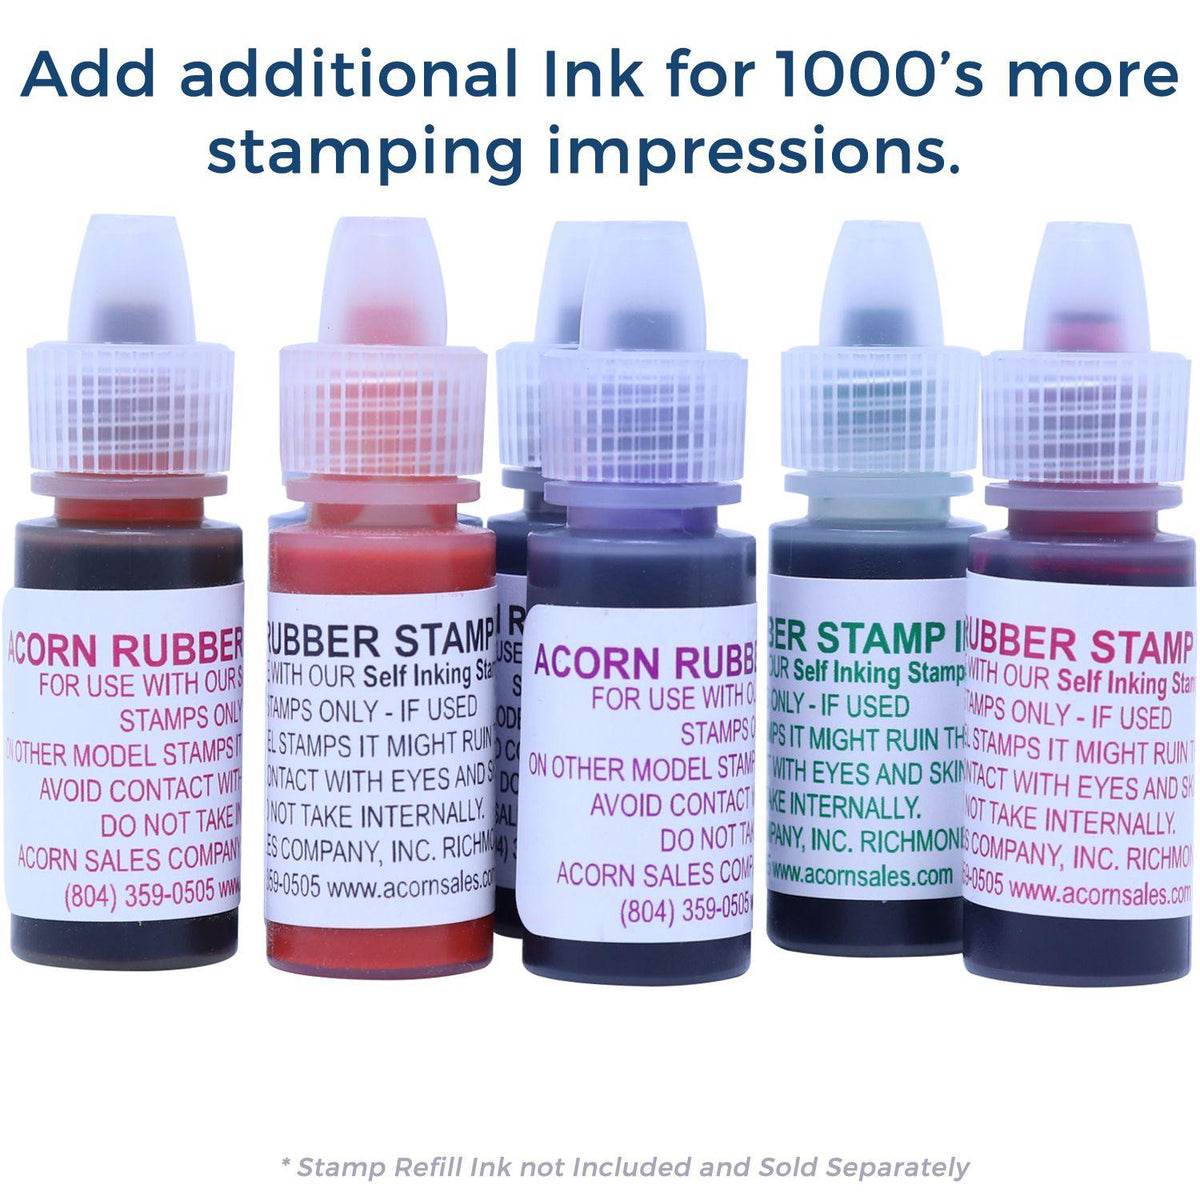 Refill Inks for Large Pre-Inked File Copy with Folder Stamp Available